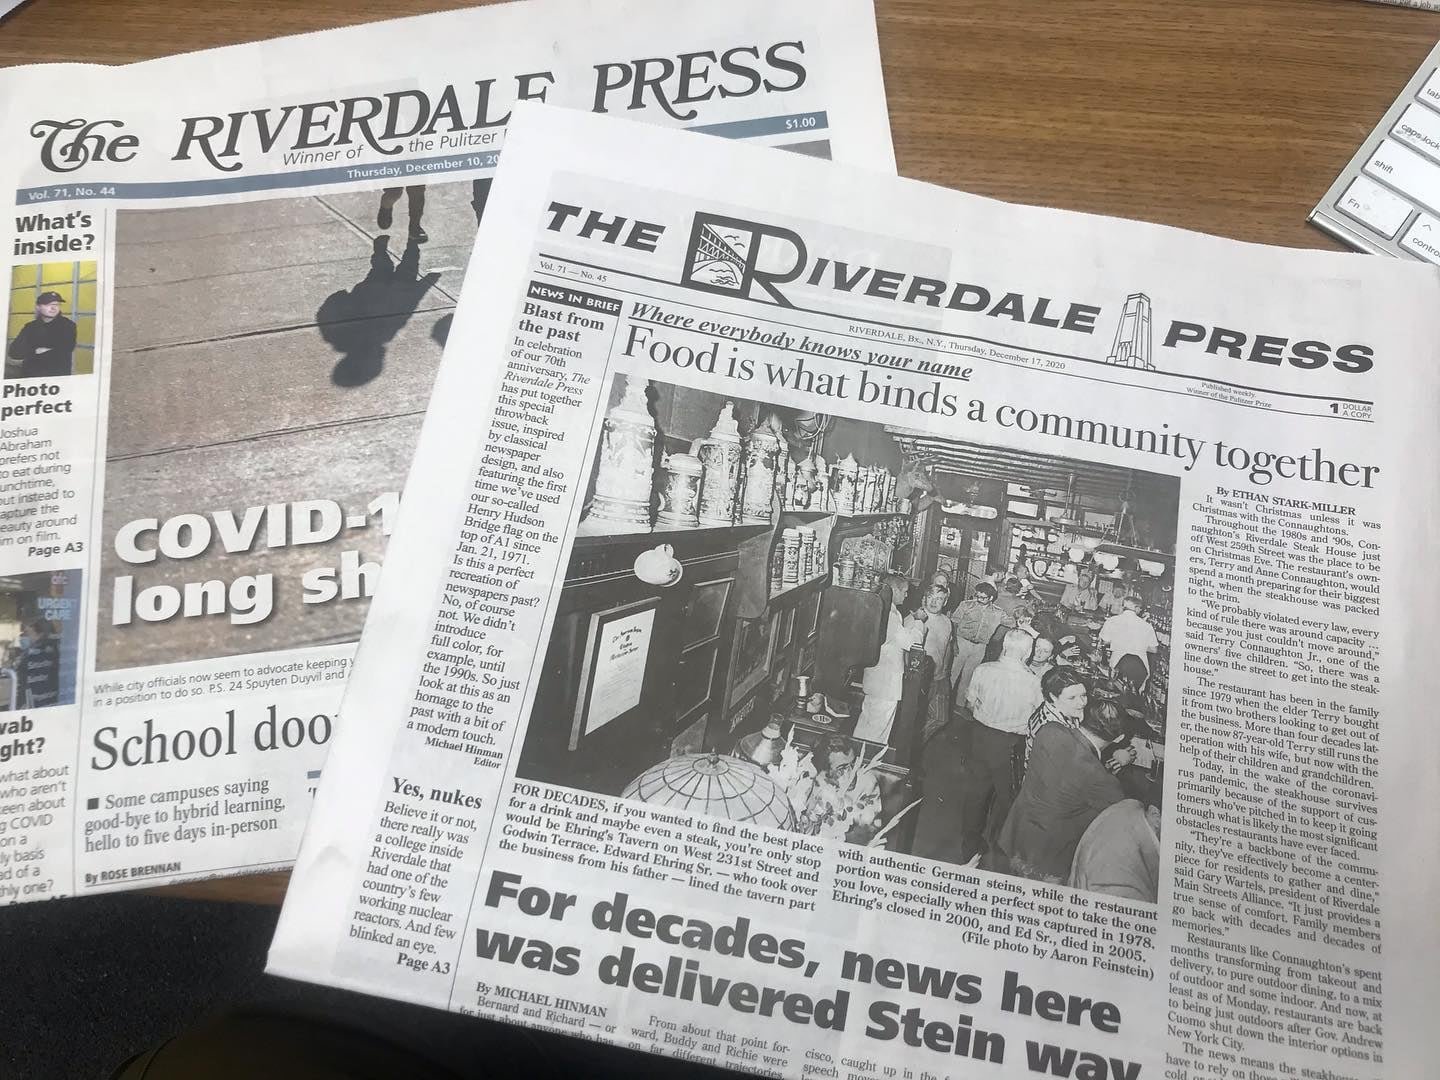 The Dec. 17, 2020 edition of The Riverdale Press was a 'throwback' issue celebrating the 70th anniversary of the paper. It was the first time since 1971 an edition of The Press was delivered to homes without its iconic flag designed by Richard L. Stein.